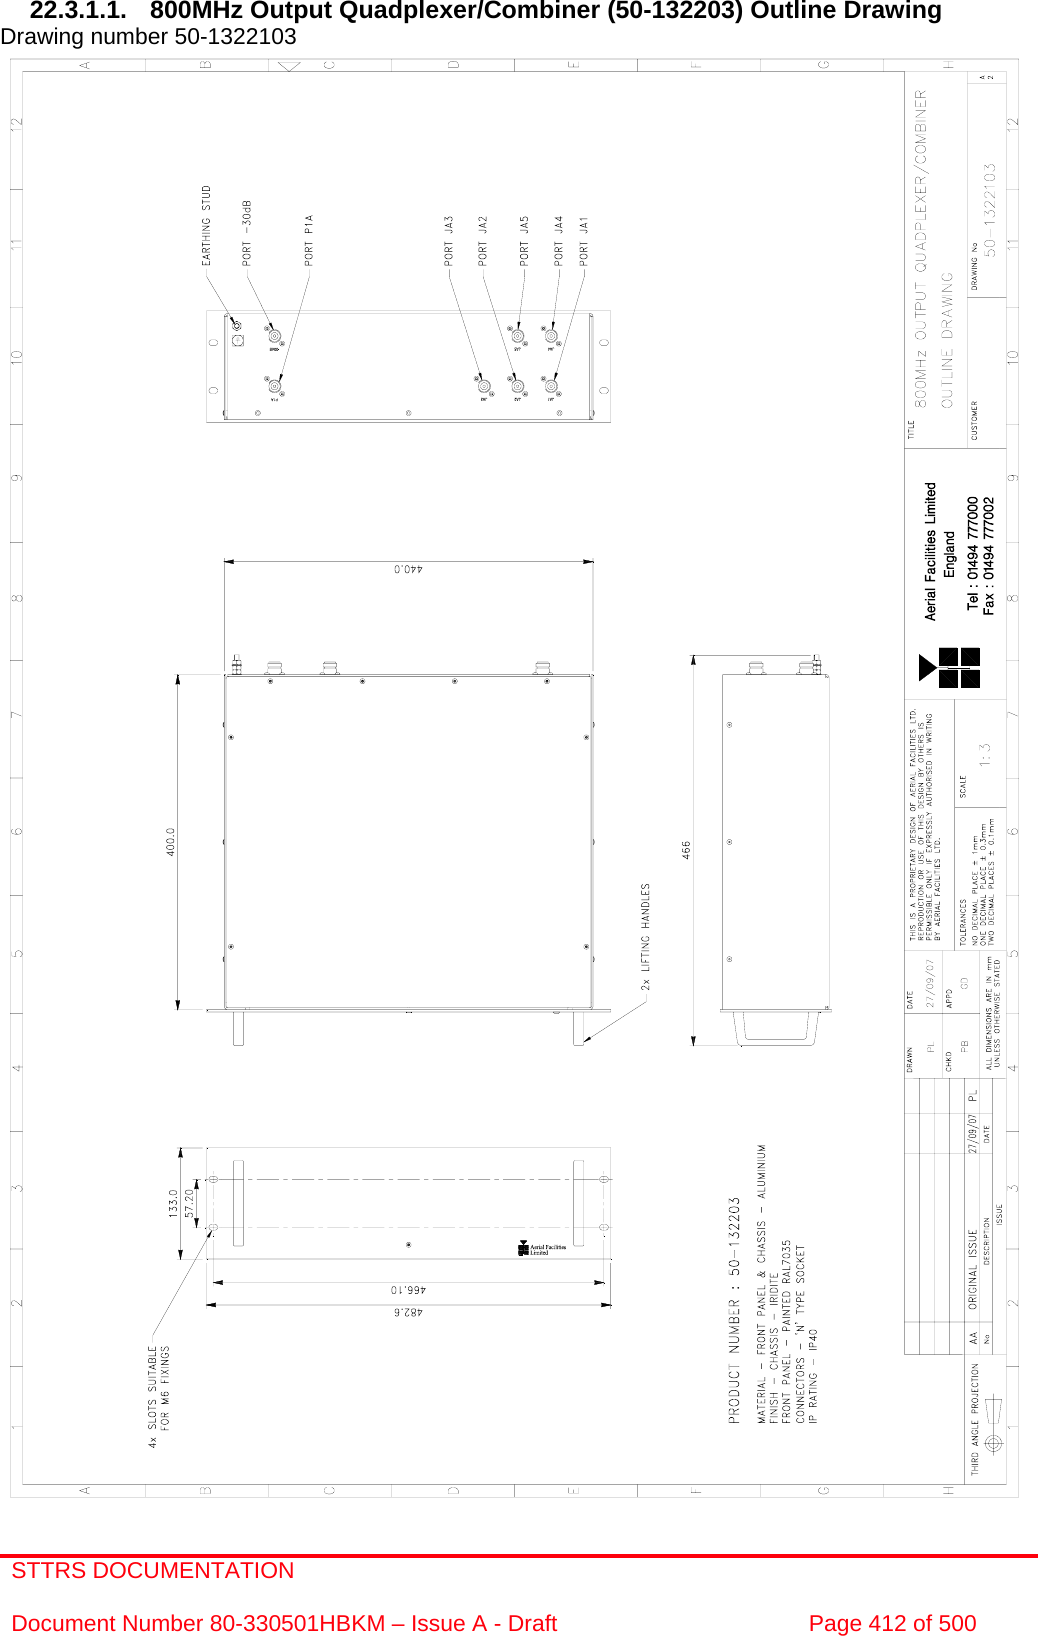 STTRS DOCUMENTATION  Document Number 80-330501HBKM – Issue A - Draft  Page 412 of 500   22.3.1.1.  800MHz Output Quadplexer/Combiner (50-132203) Outline Drawing Drawing number 50-1322103                                                      